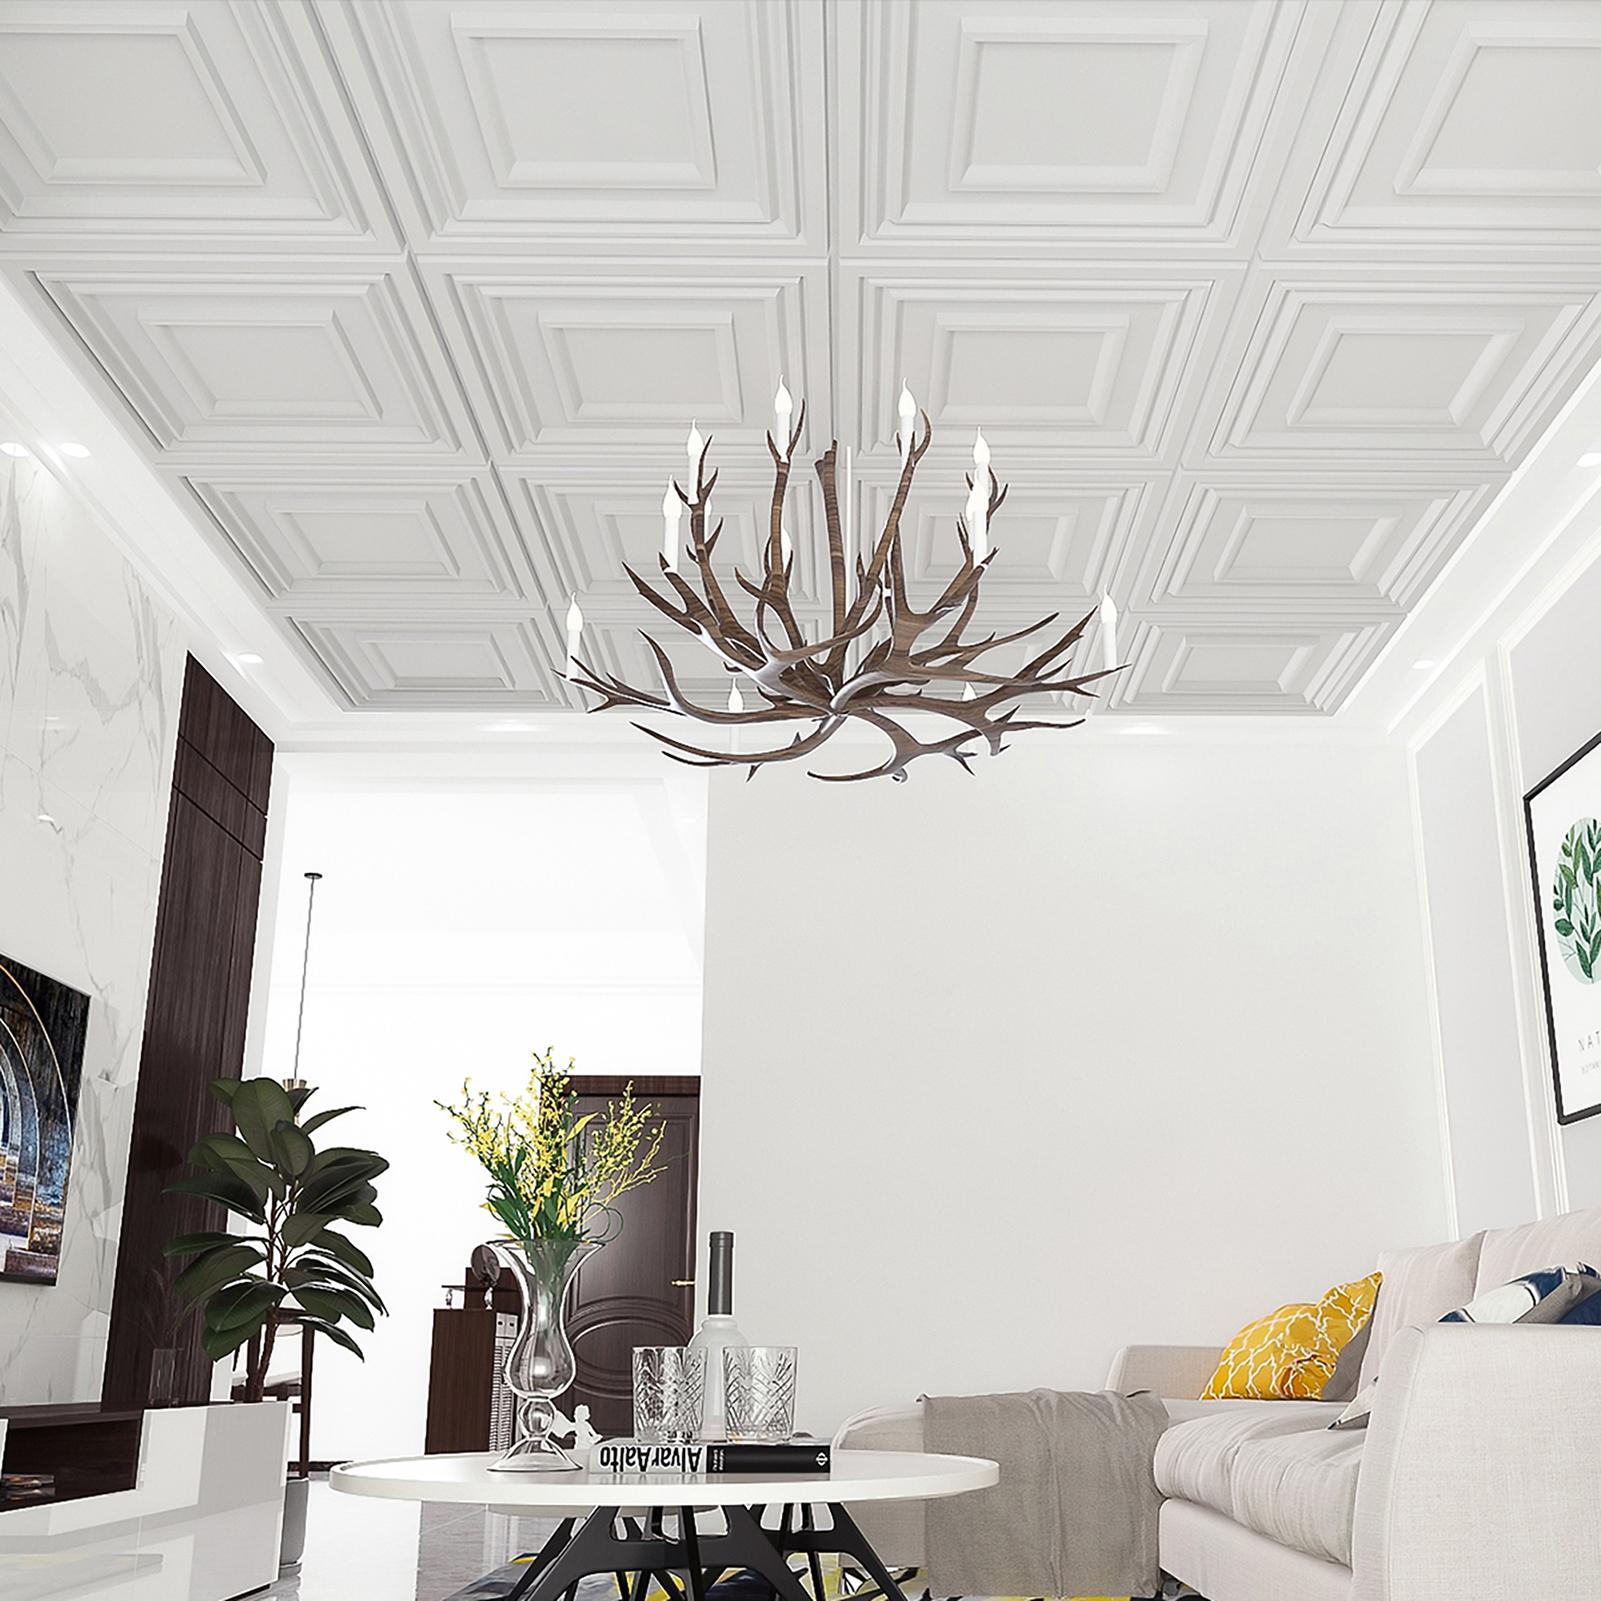 Excellent for Ceiling or Wall Decoration